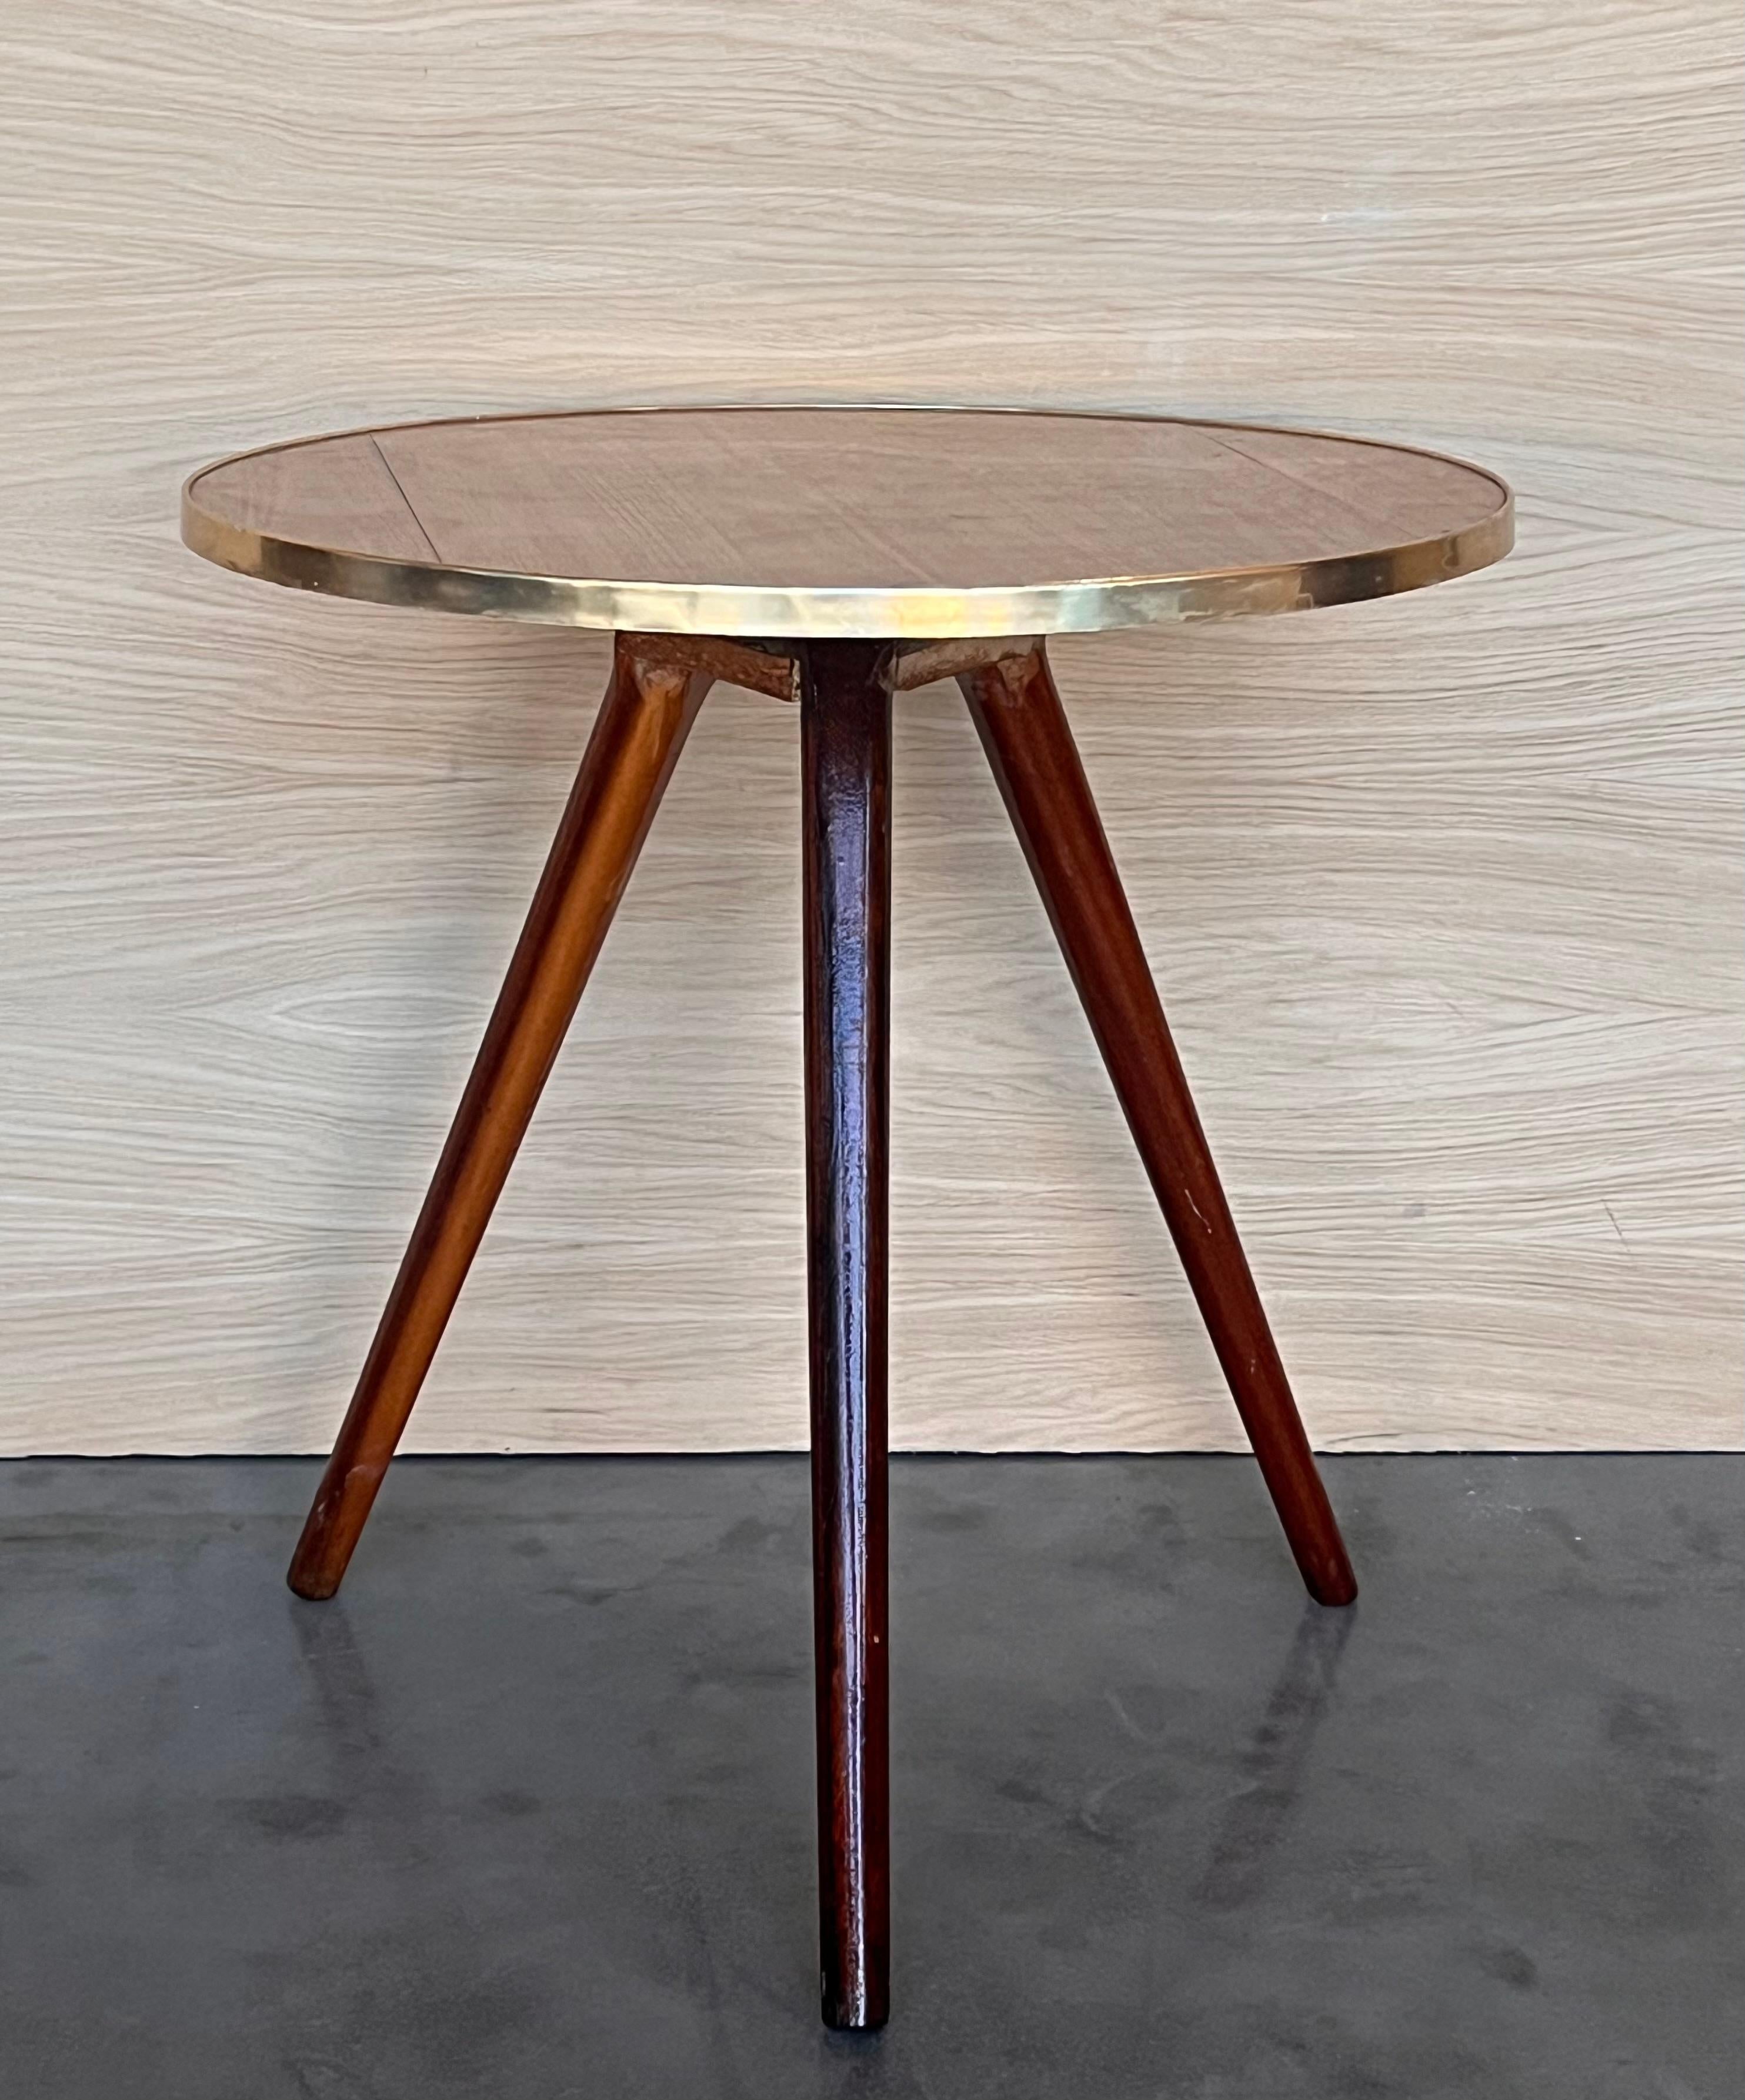 Beautiful  vintage side table, Italian style, with a round base in wood  brass edge that rests on wood legs. 
This side table look good  in a dining room and in a bedside table room. 
This is a gueridon or side table that you can also use as lamp